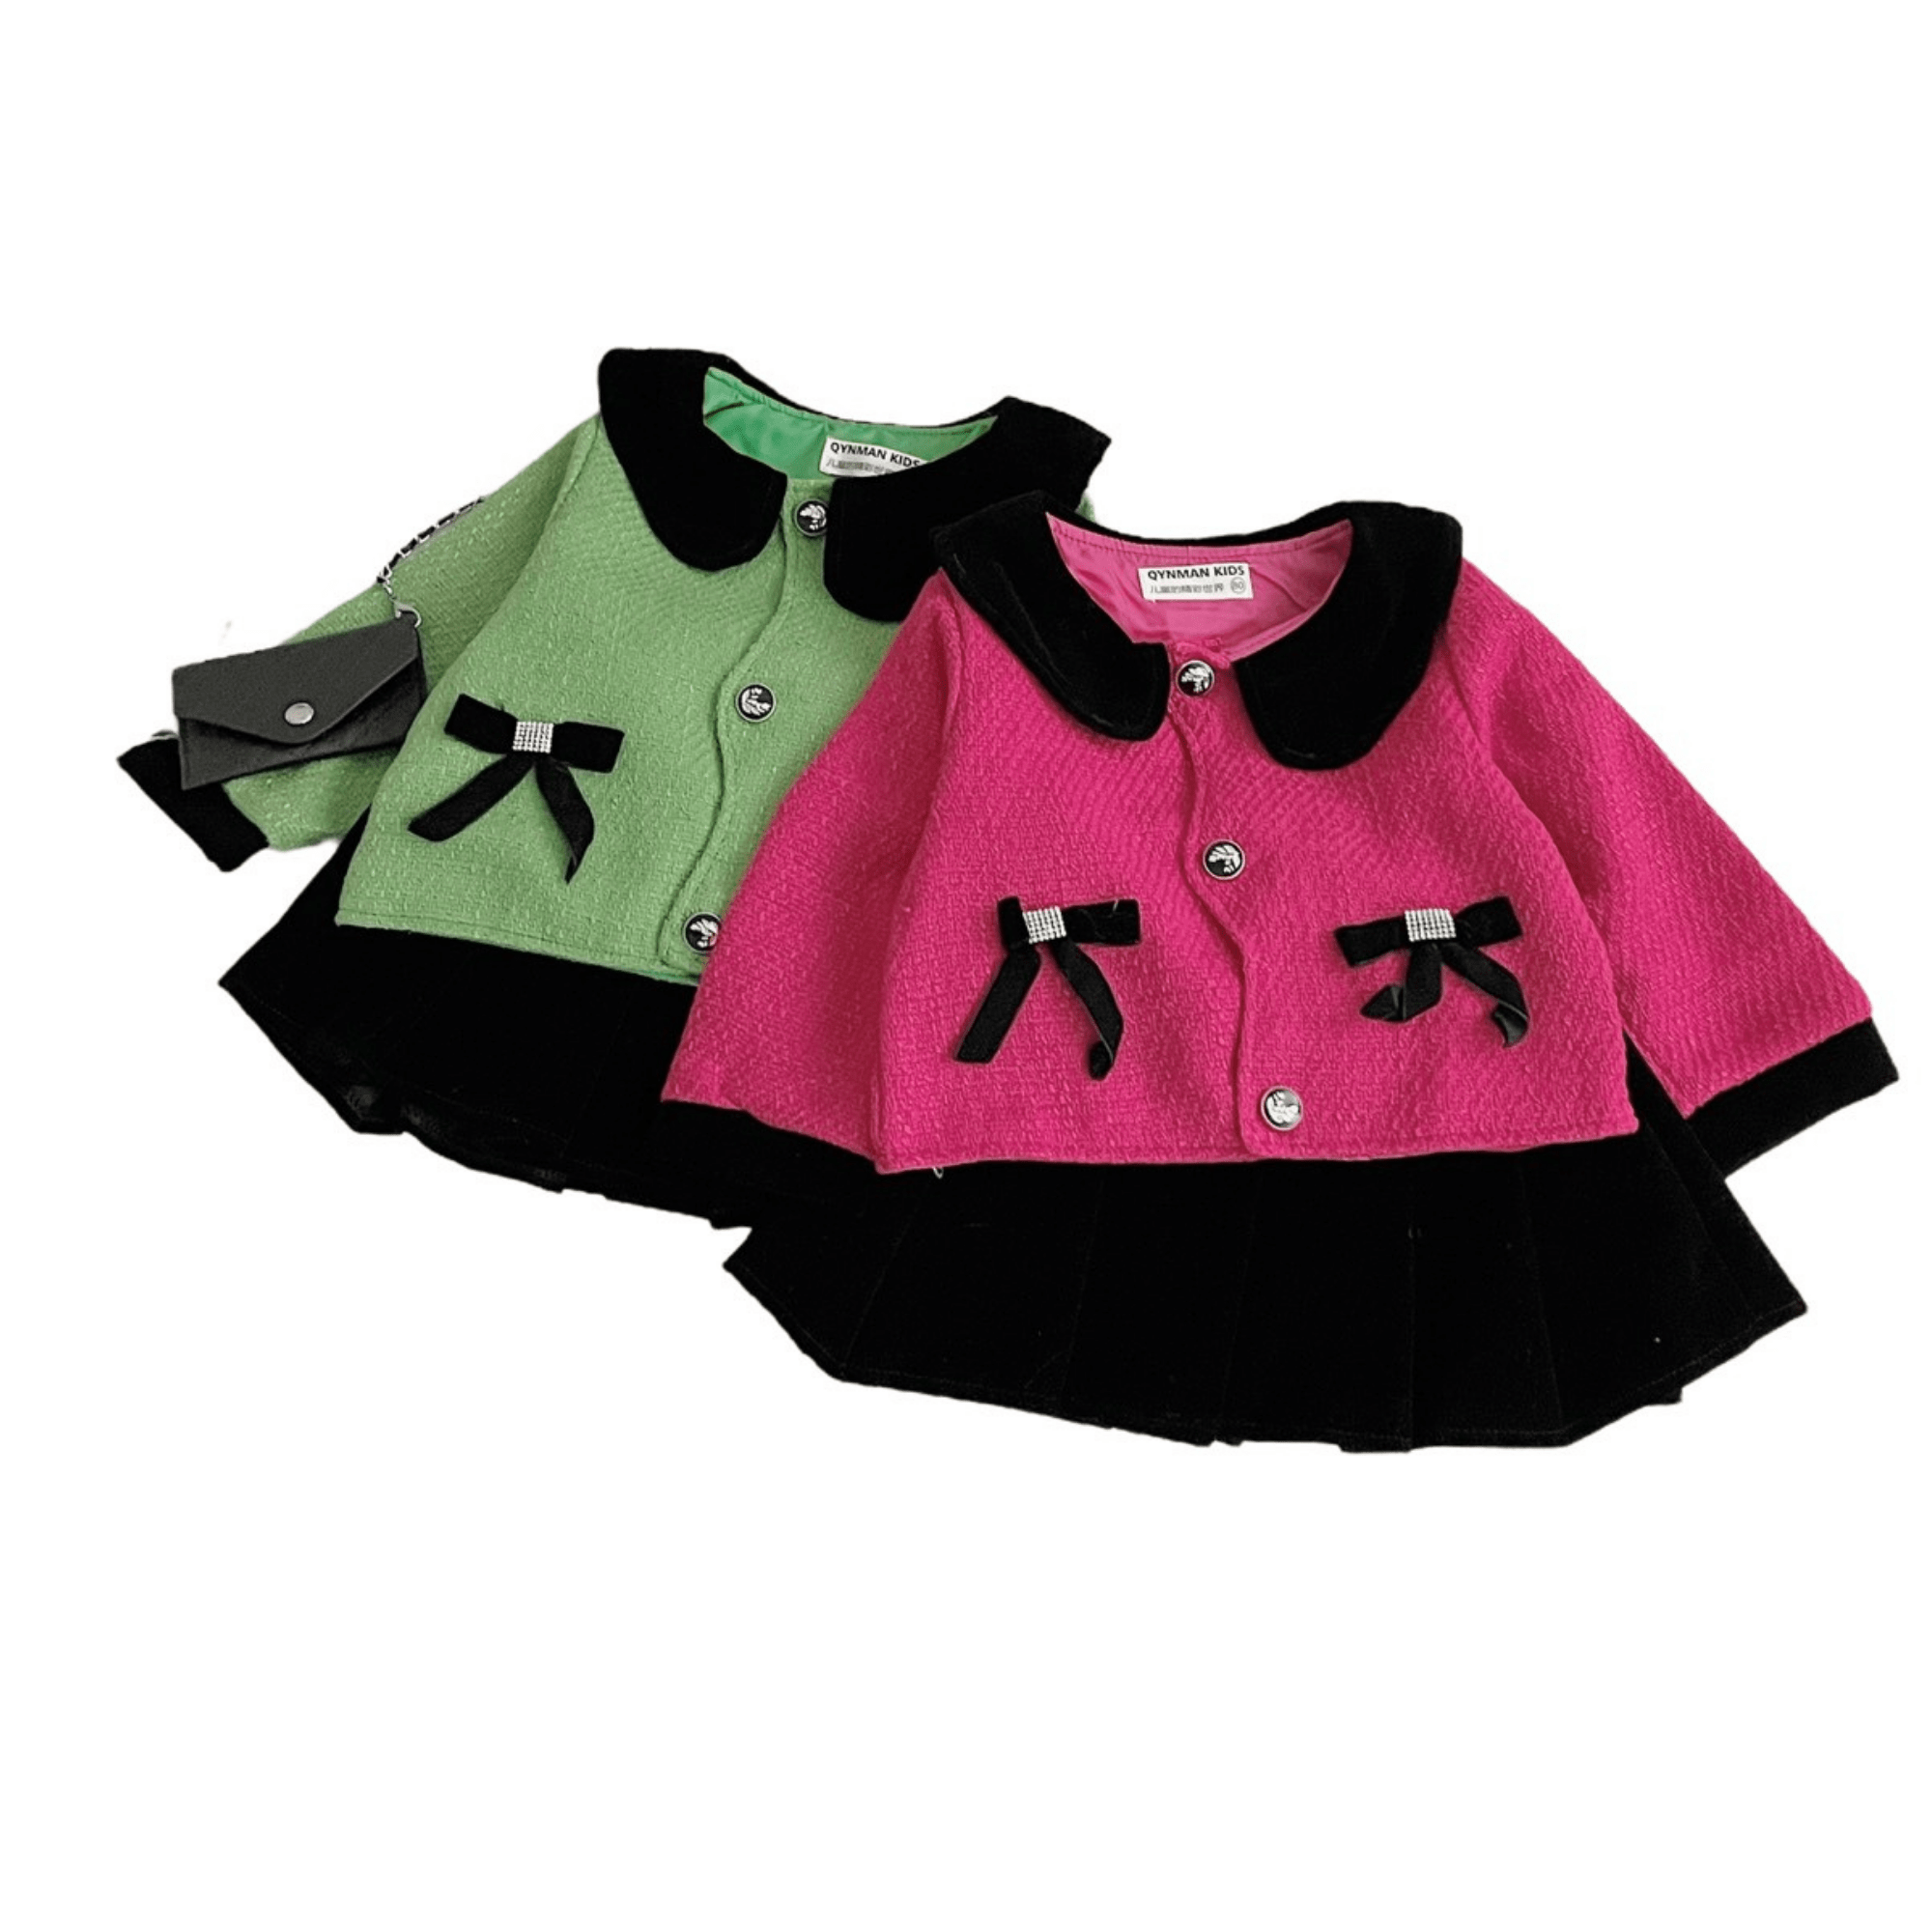 Clothes For Kids Girls Comfortable 100% Wool Dresses Cute Each One In Opp Bag From Vietnam Manufacturer 2